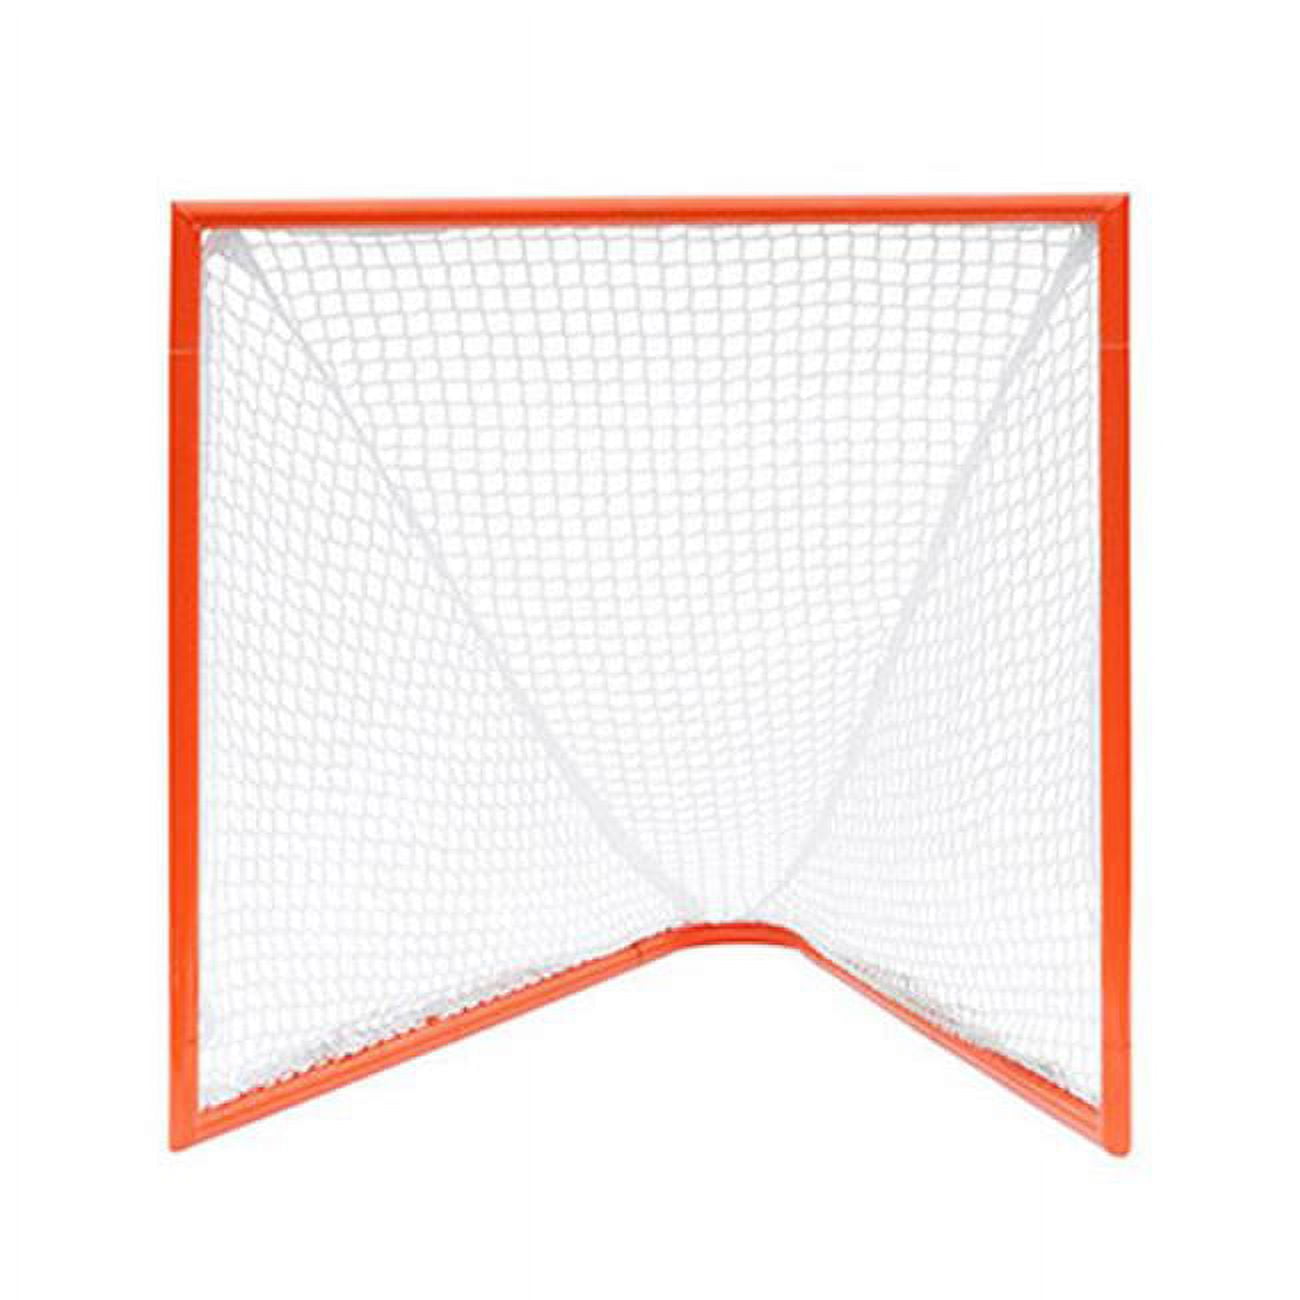 Picture of Champion Sports LBOX44 4 x 4 x 4 ft. Box Lacrosse Goal